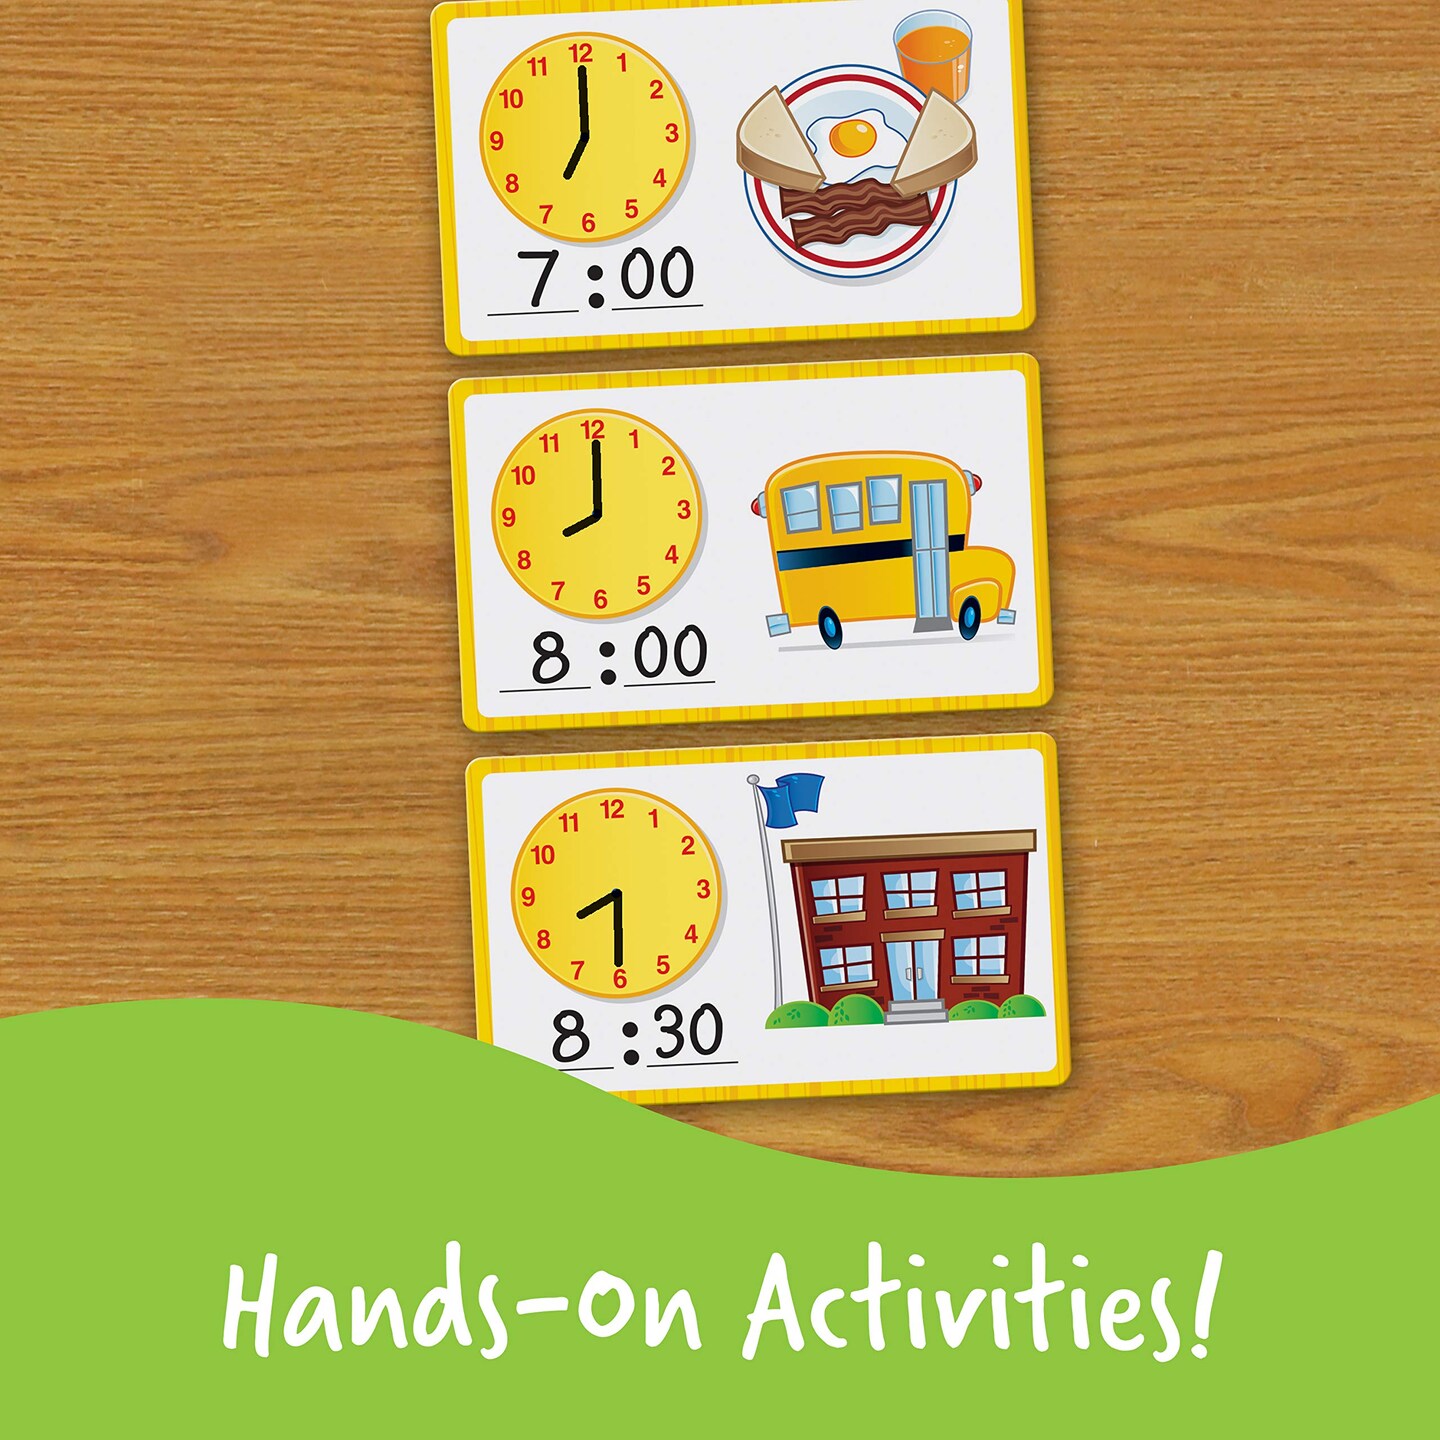 Learning Resources Time Activity Set - 41 Pieces, Ages 5+,Clock for Teaching Time, Telling Time, Homeschool Supplies, Montessori Clock